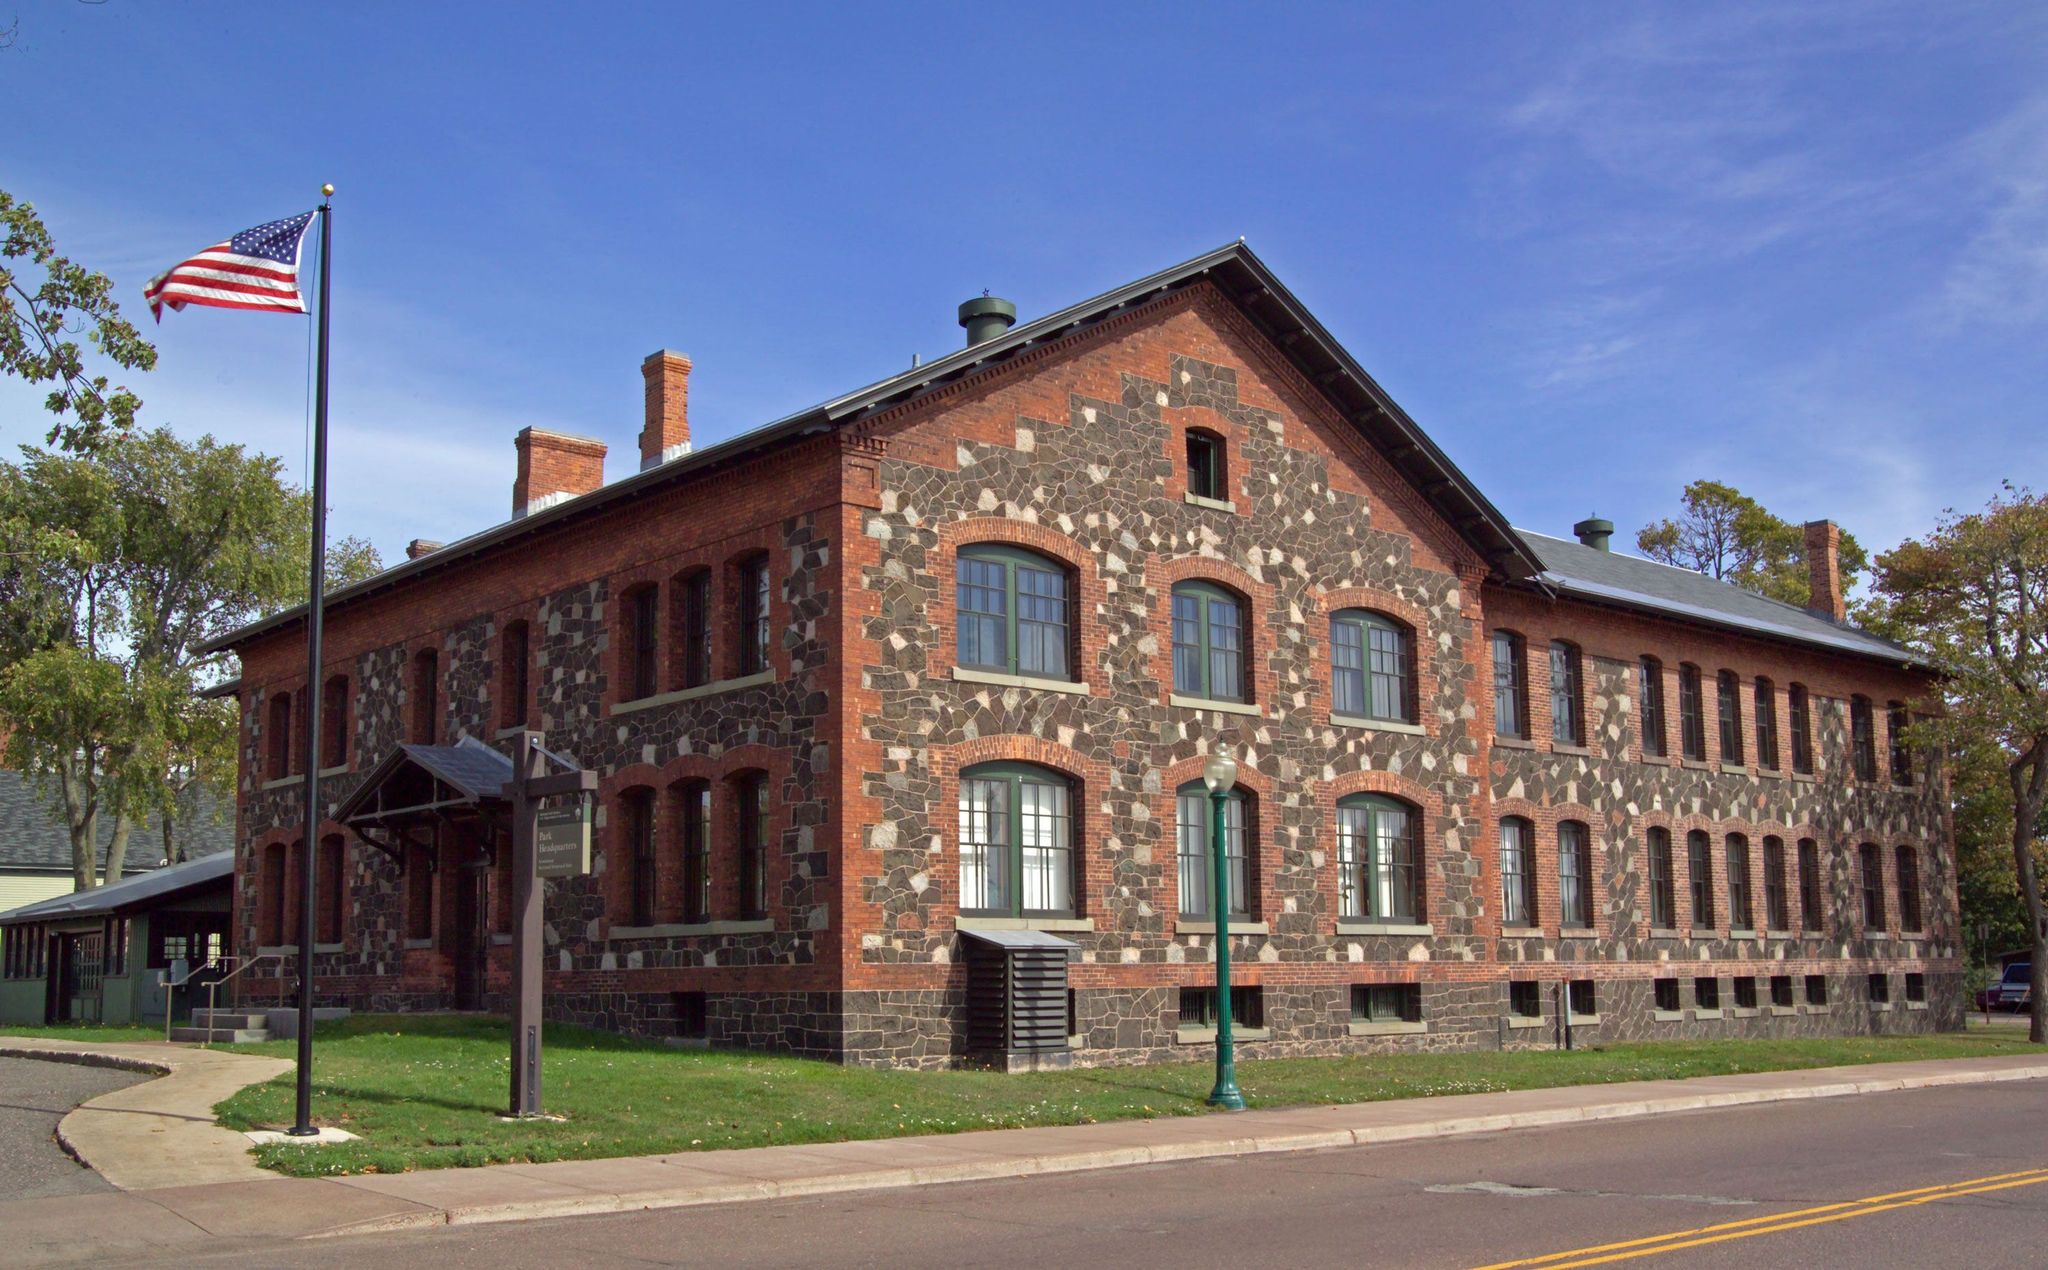 Park Headquarters is housed in the former Calumet & Hecla Mining Company General Office building.